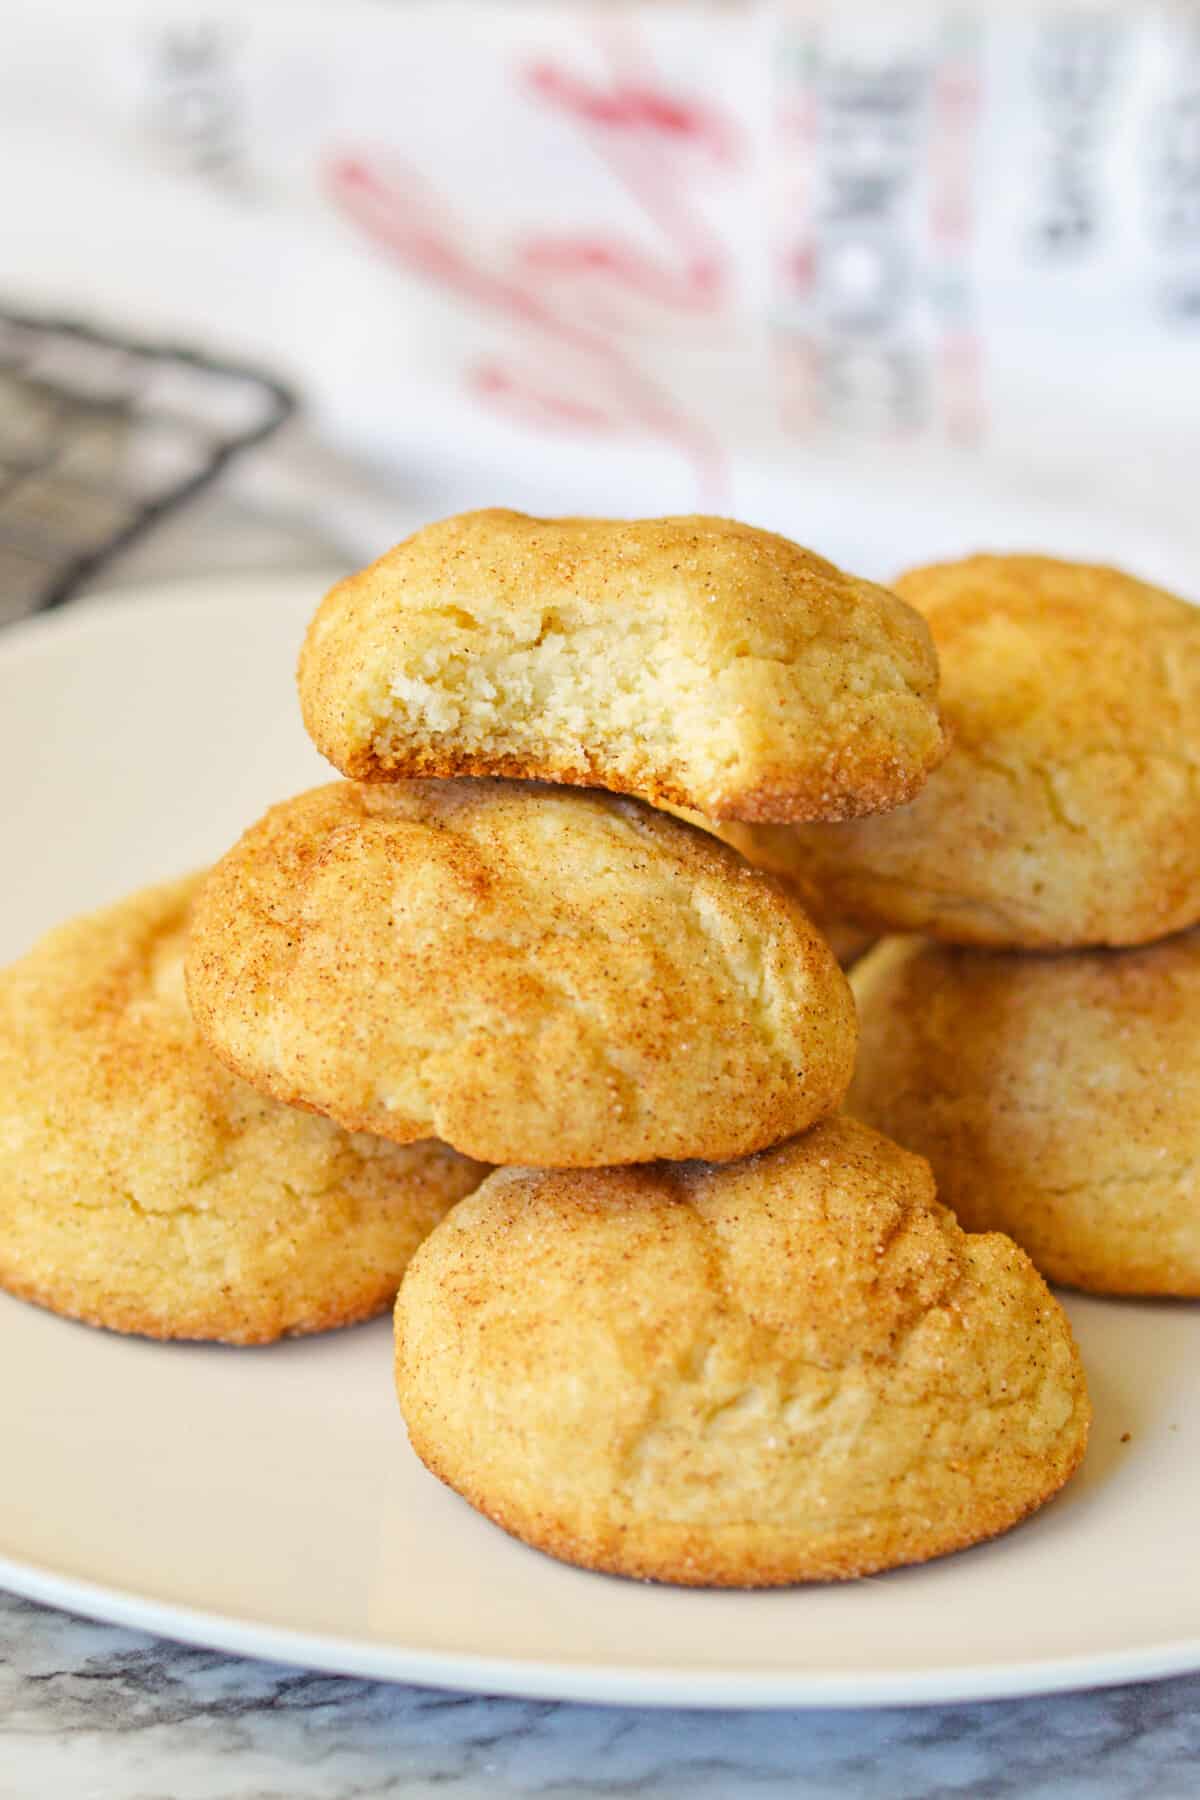 Cake mix snickerdoodles on a plate with one cookie missing a bite.